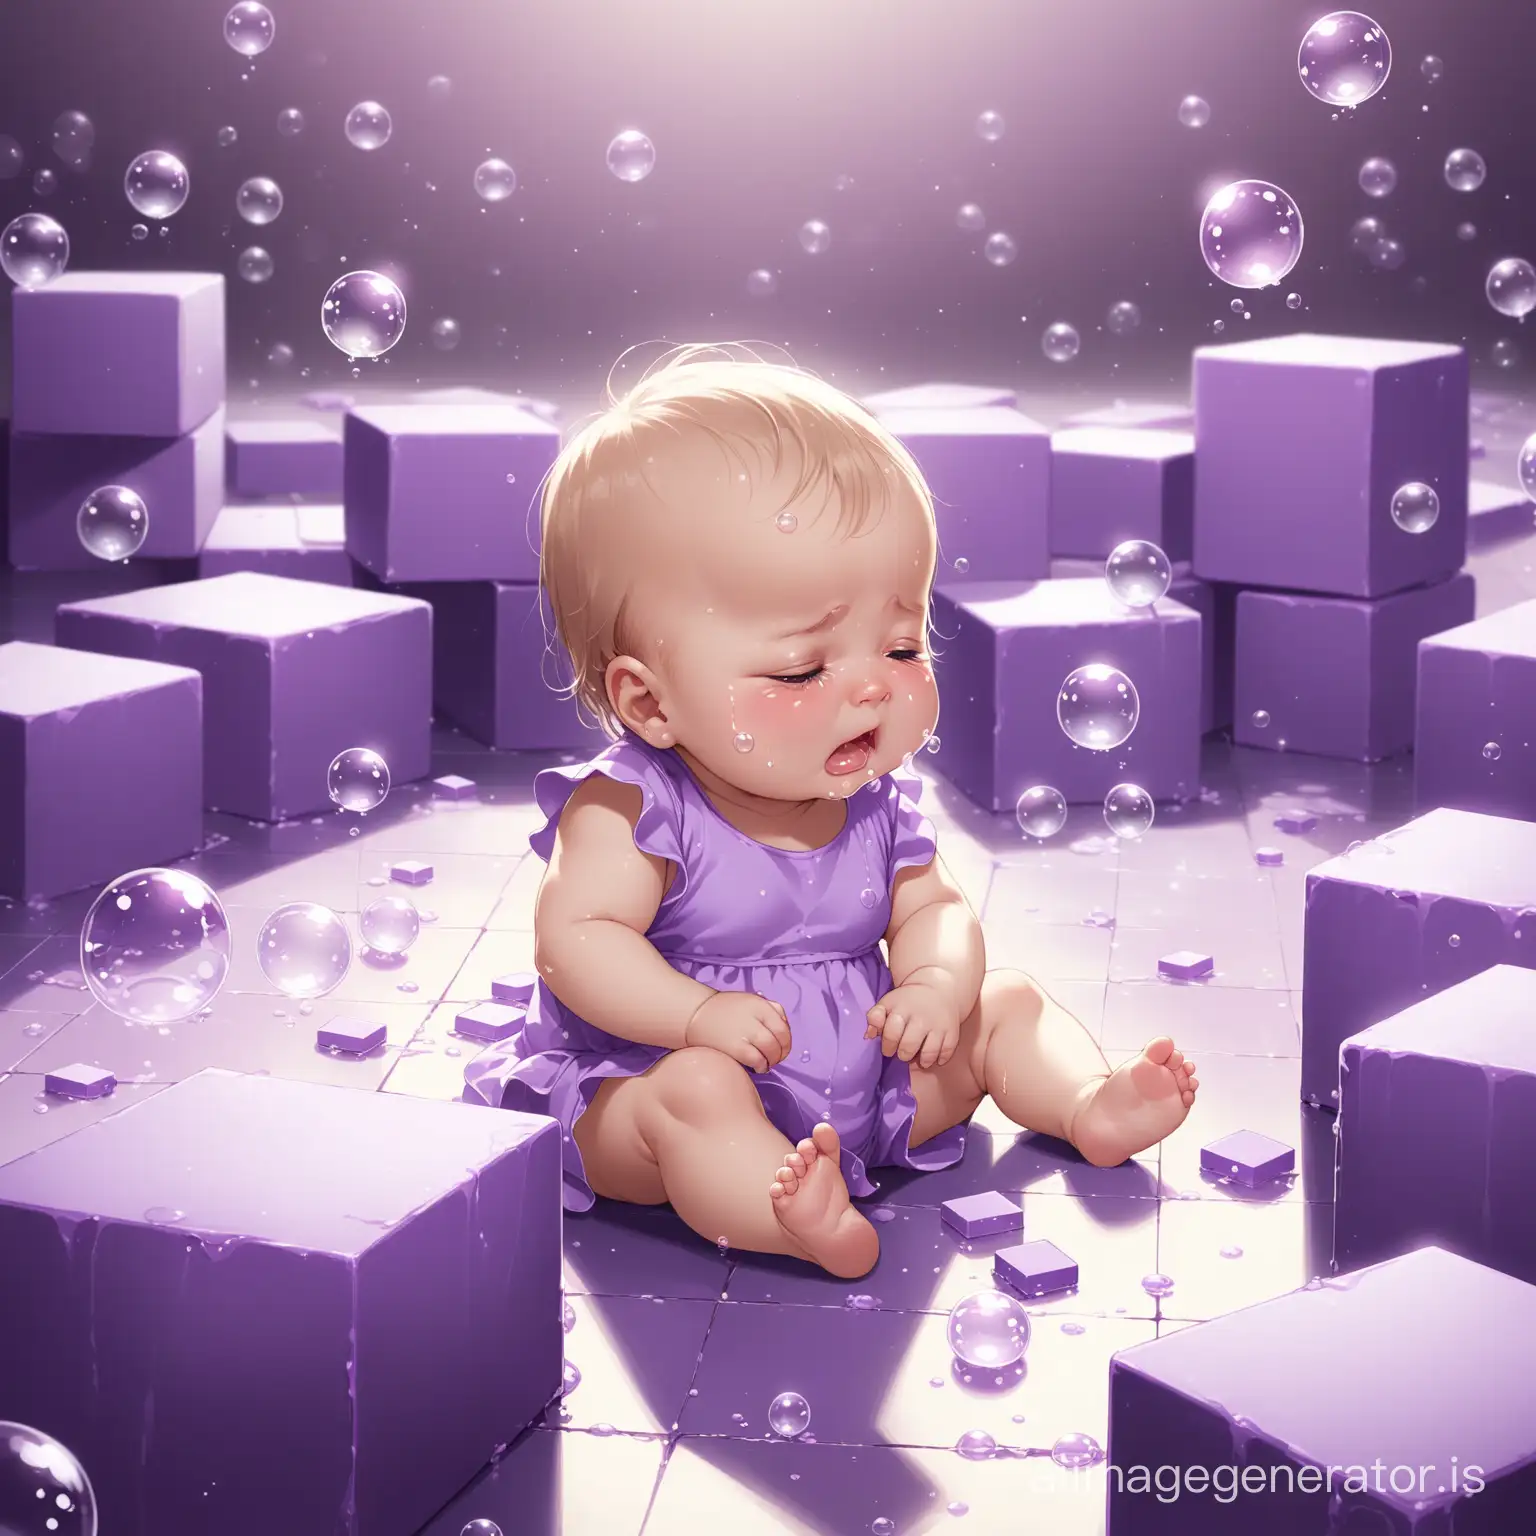 AThe little baby is sitting and crying and sad
Bubbles are everywhere
little purple blocks fell on the floor
The details are beautifully evident